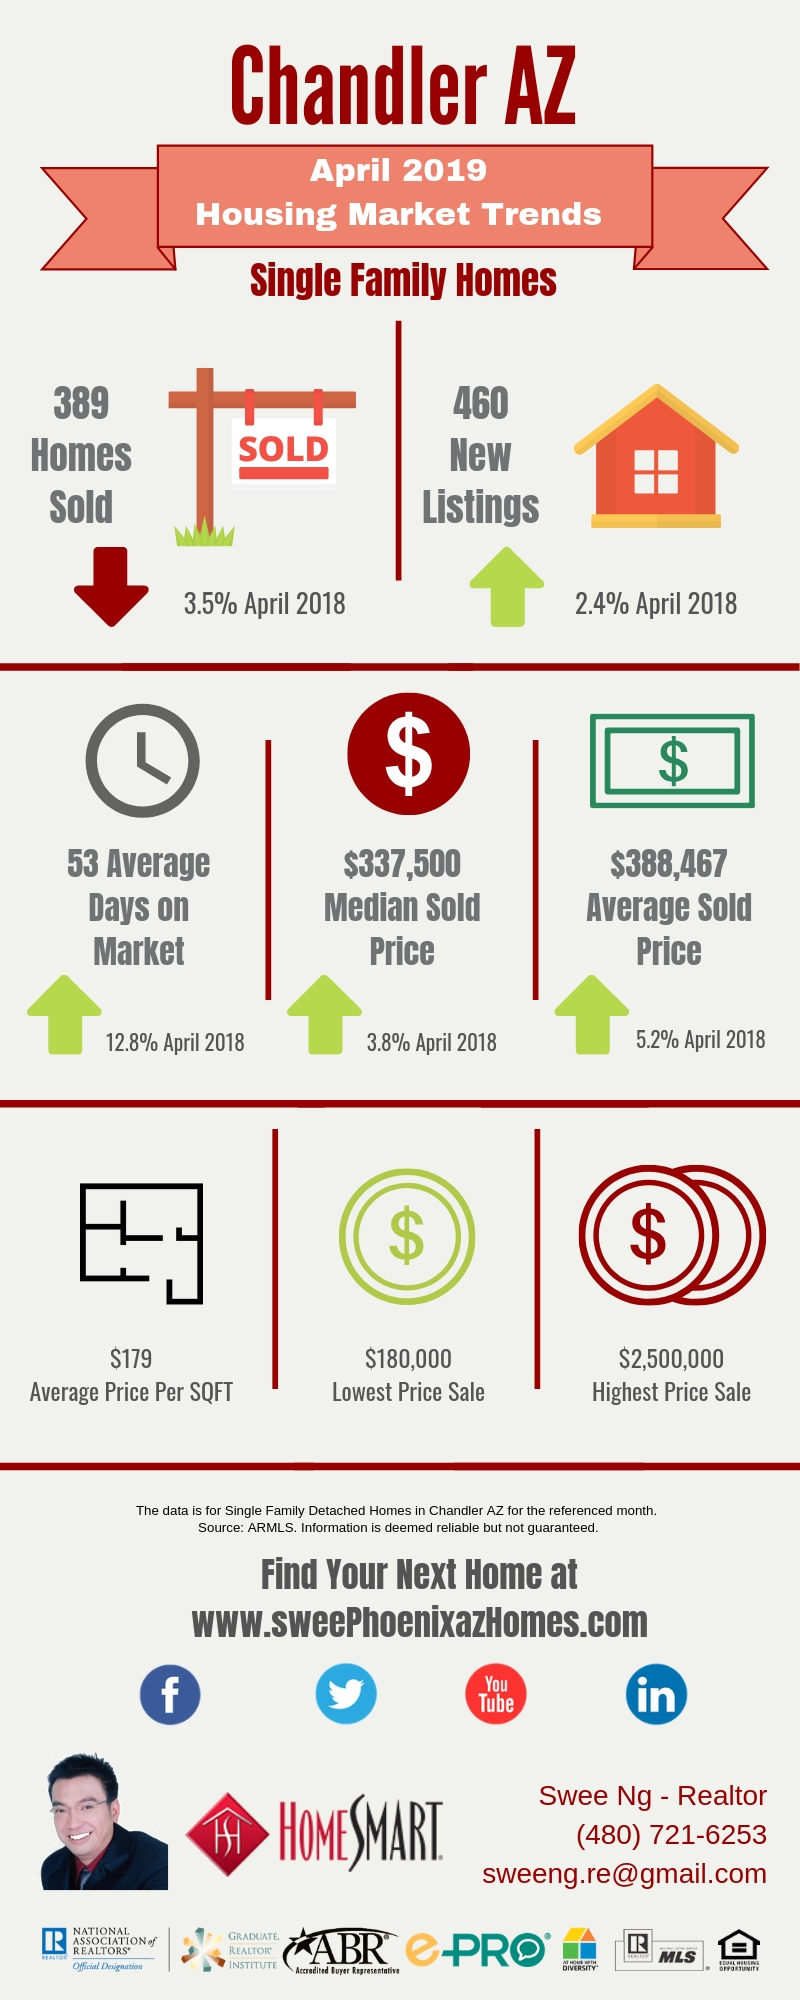 Chandler AZ Housing Market Update April 2019 by Swee Ng, House Value and Real Estate Listings